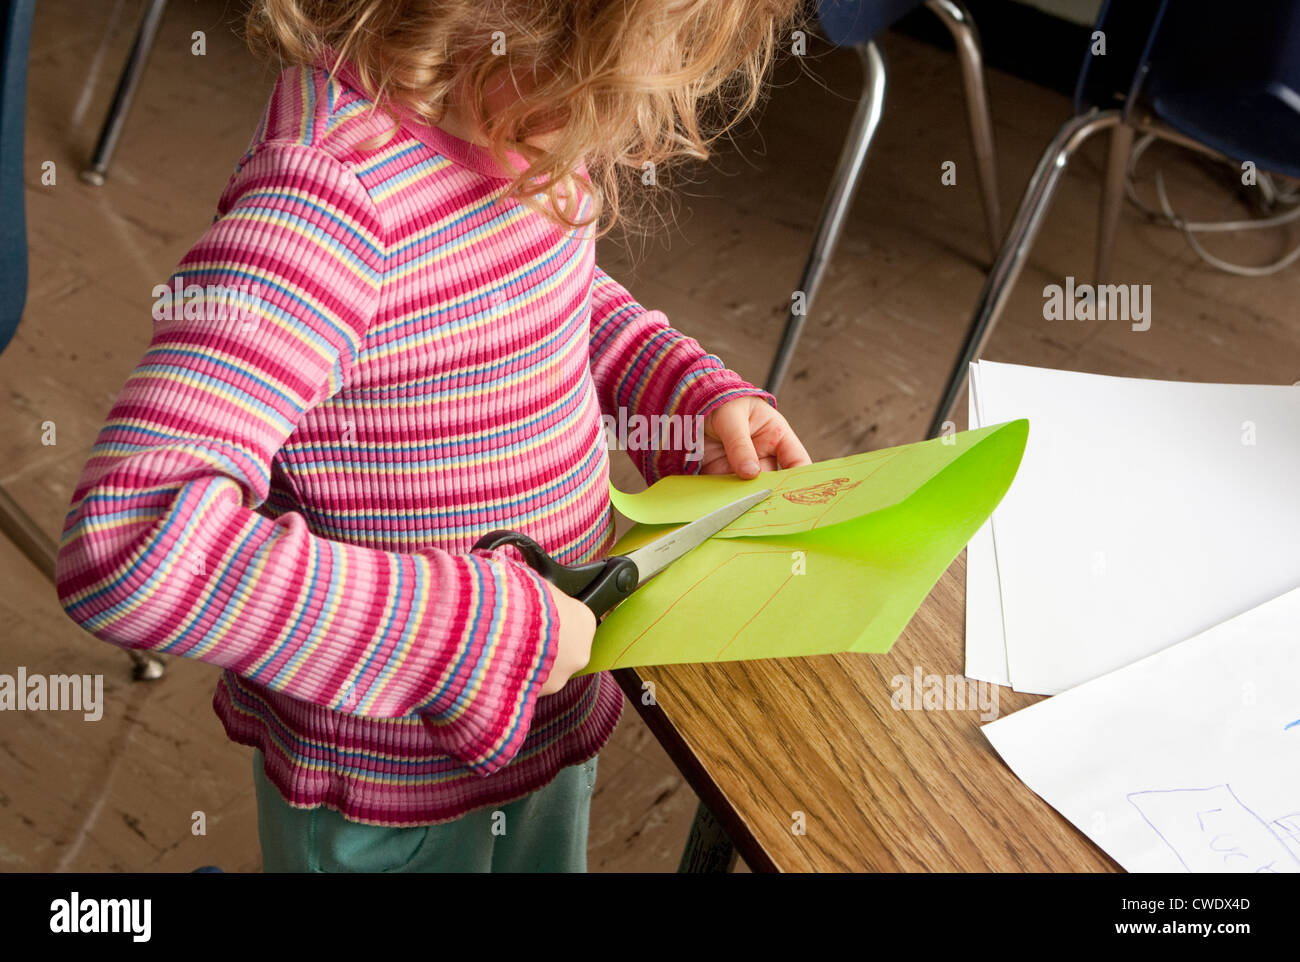 young white 5 year old girl in colorful sweater, uses large dangerous scissors to cut through green paper without supervision Stock Photo